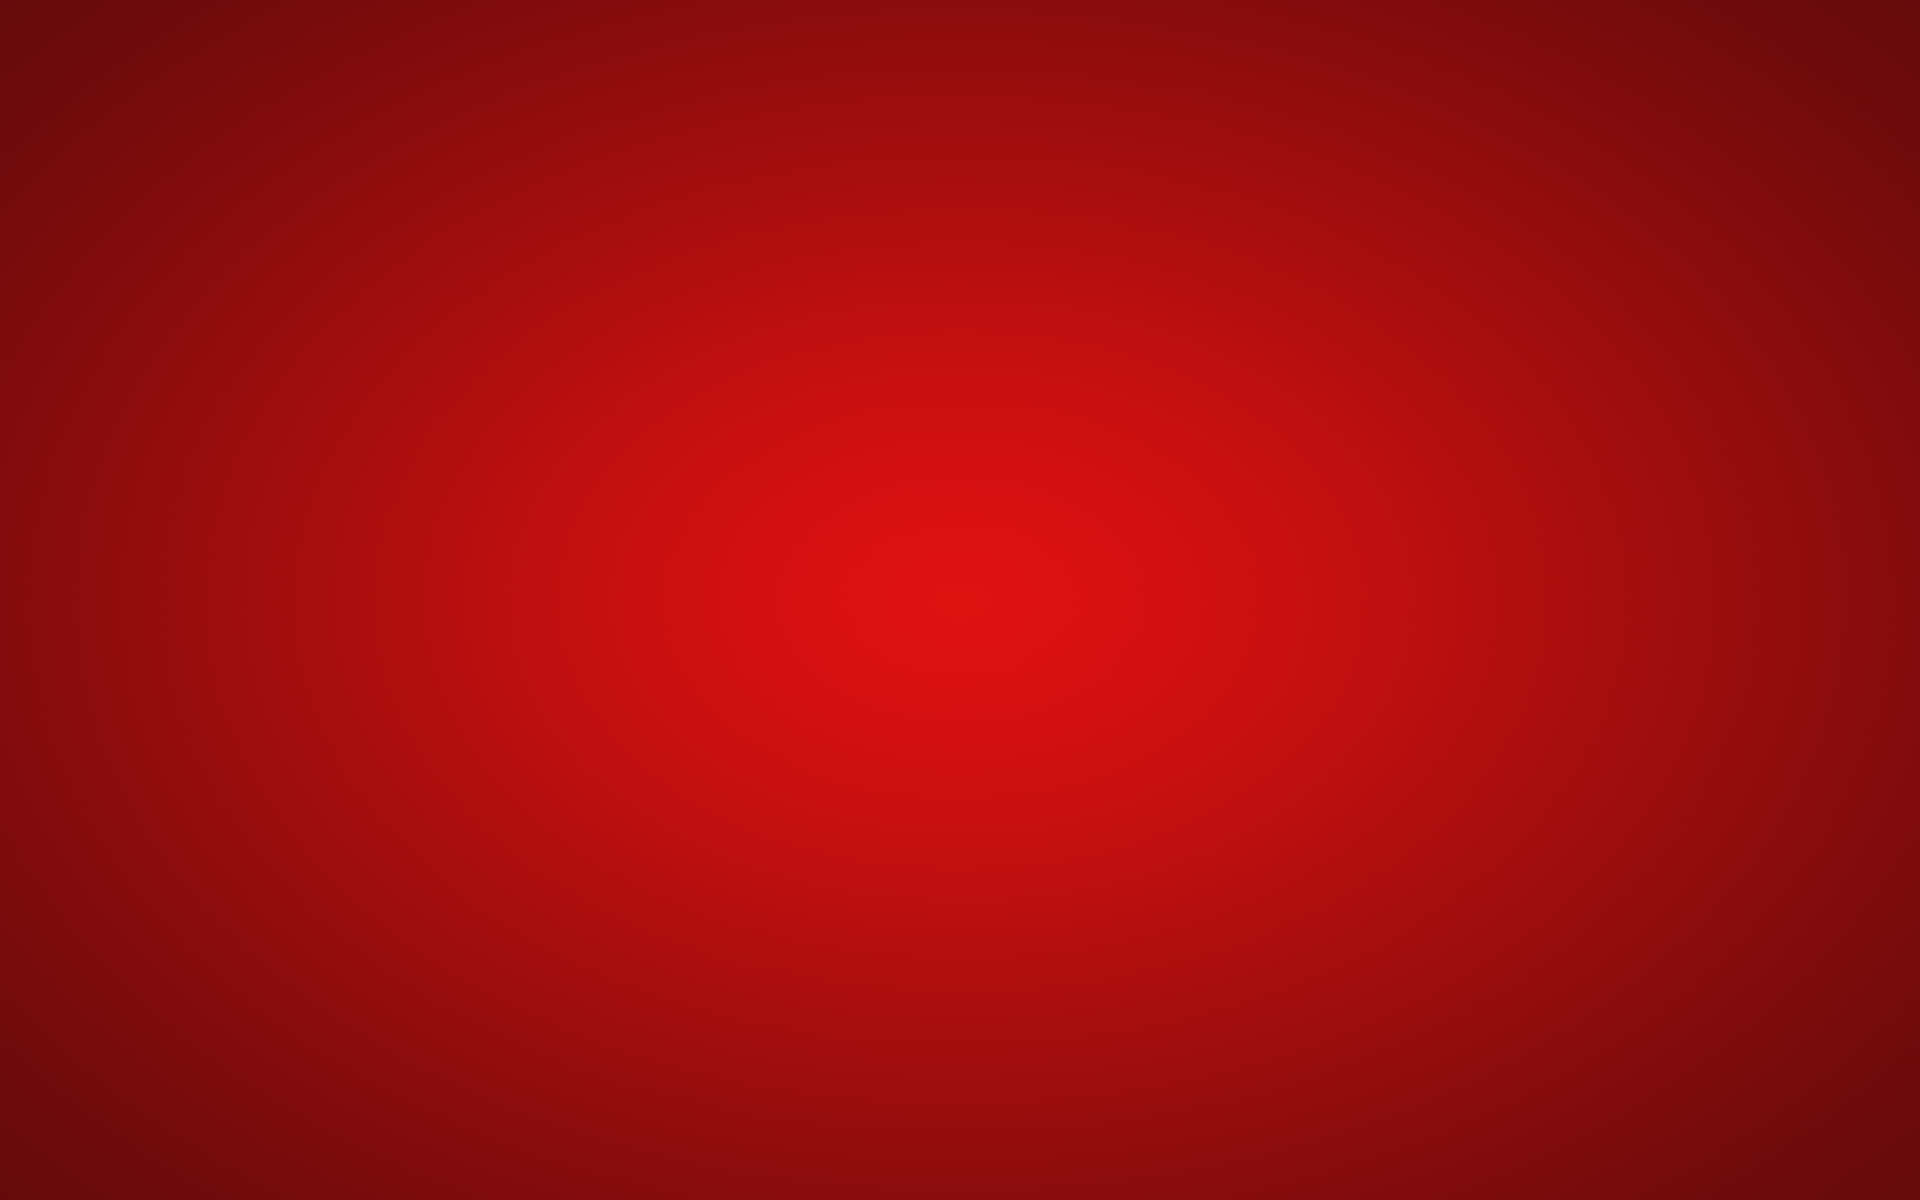 100+] Red Light Background s for FREE 